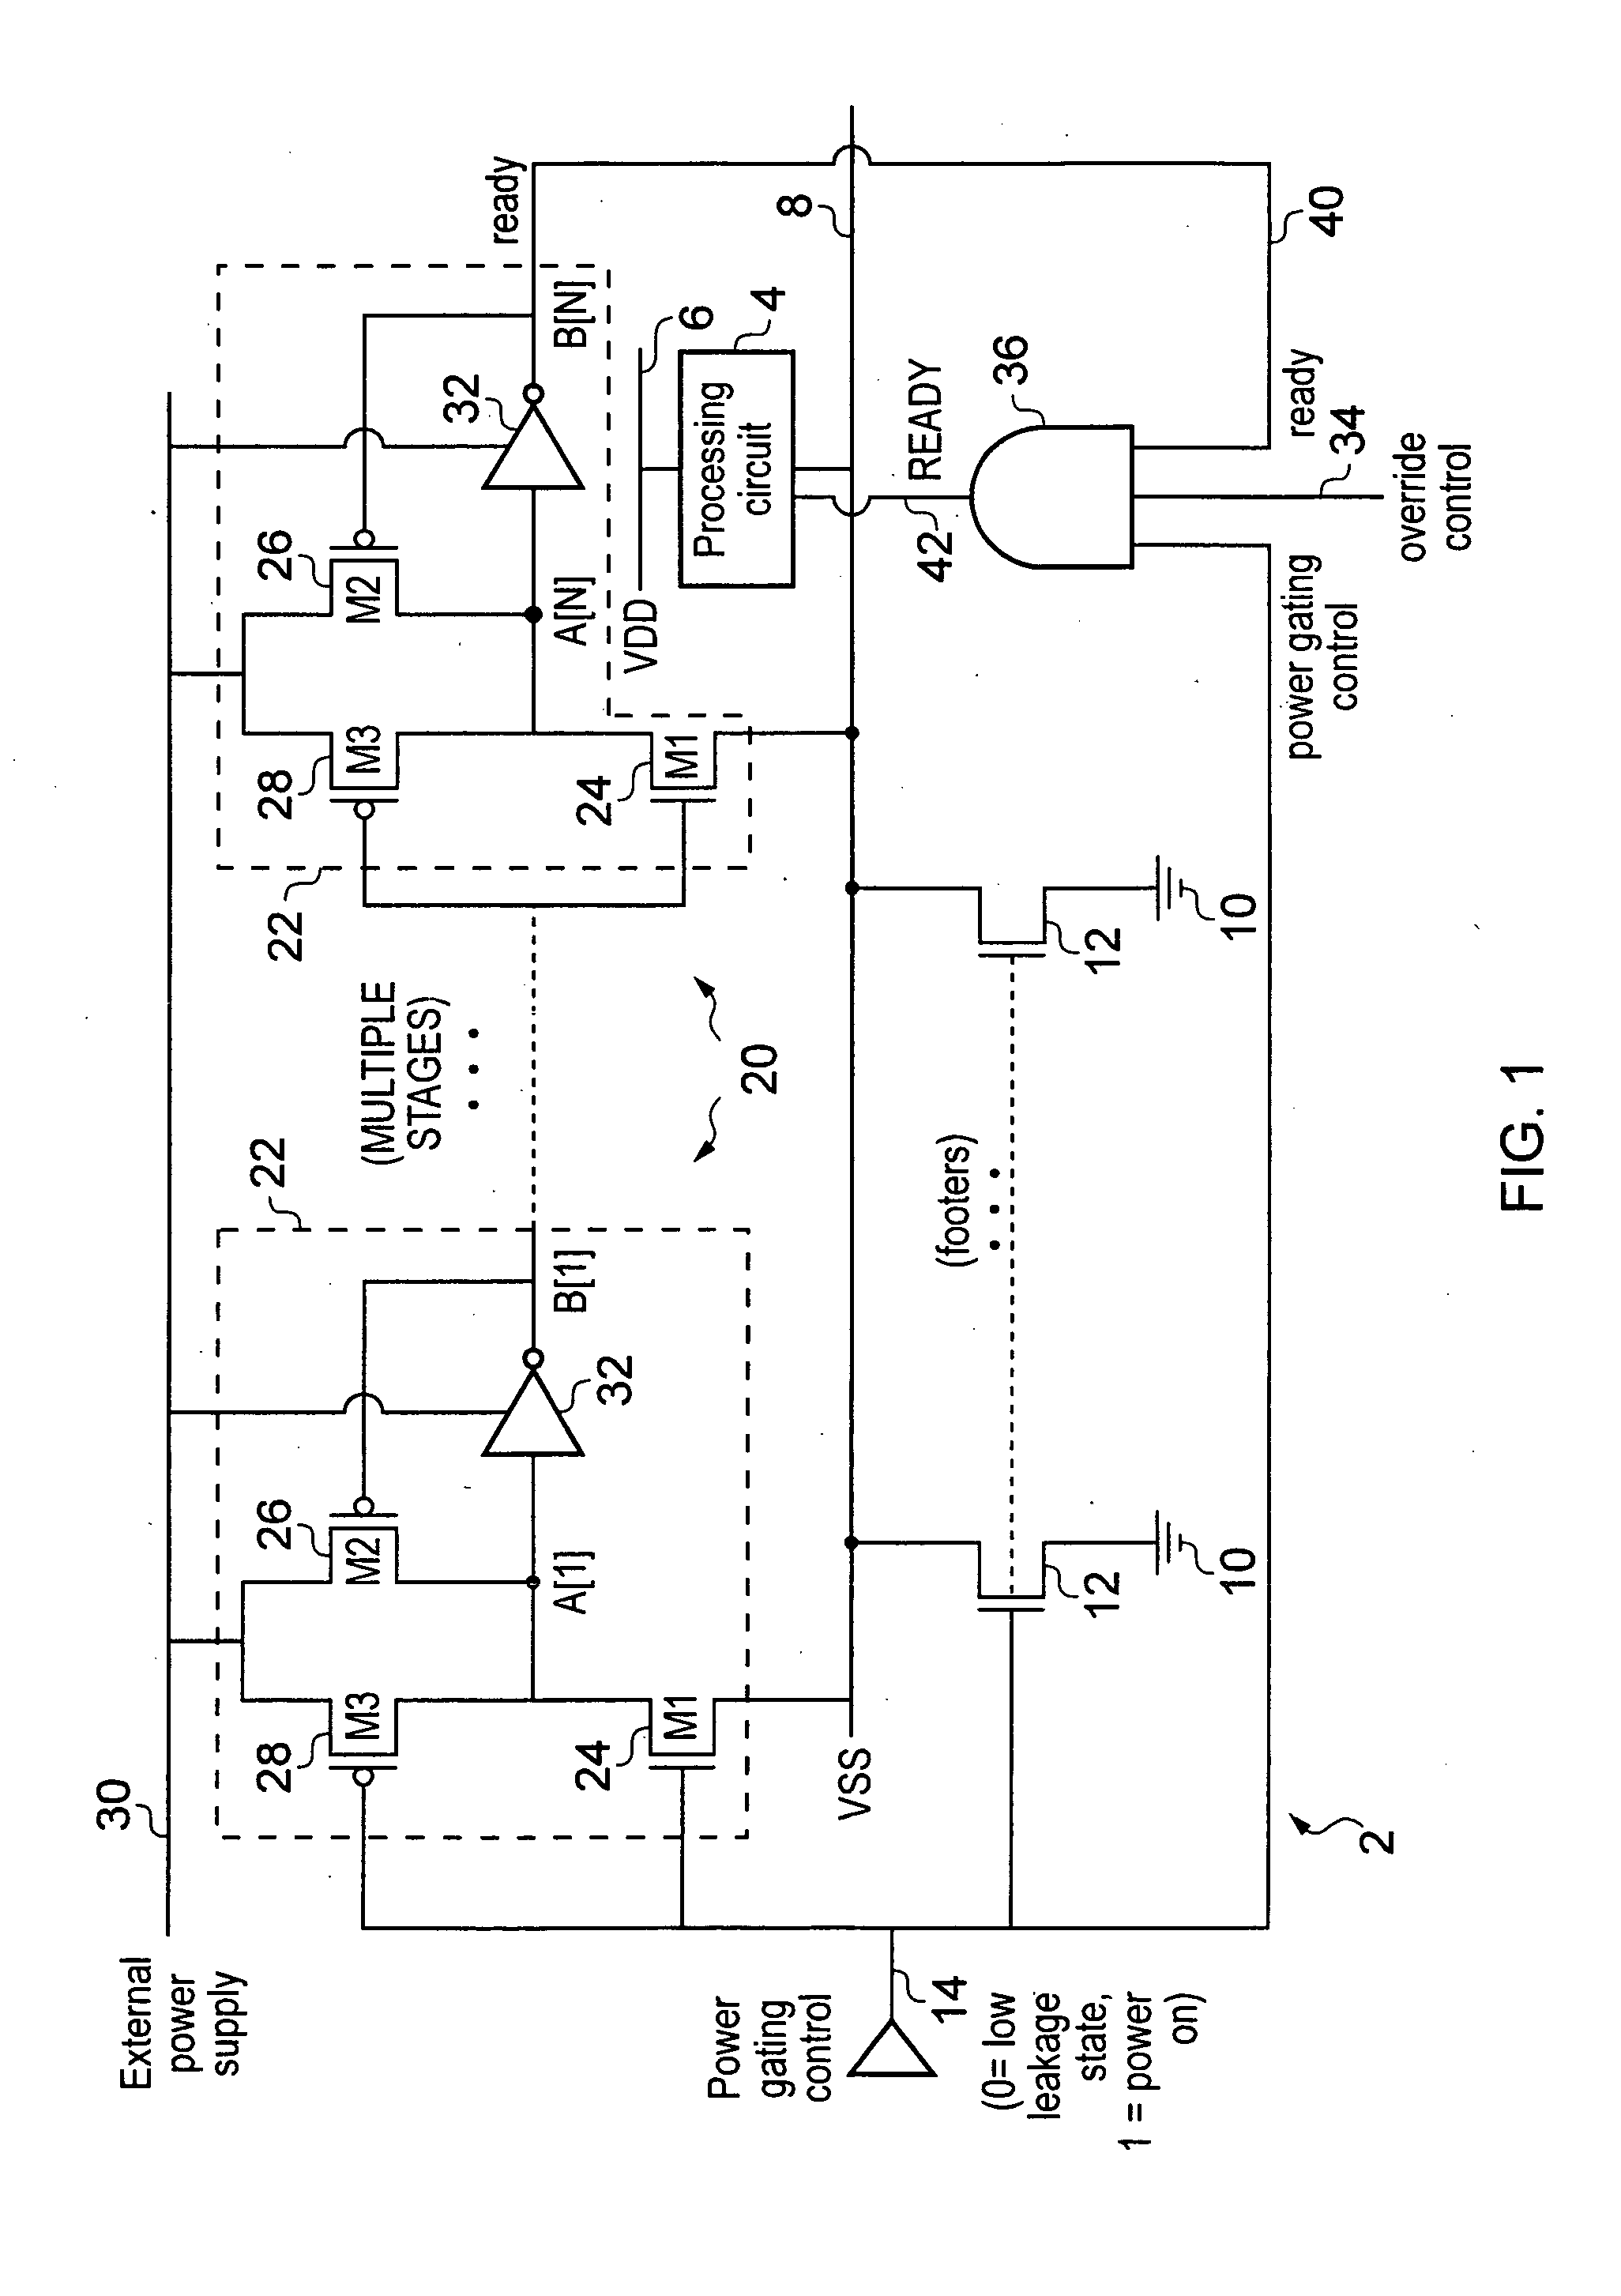 Power supply detection circuitry and method